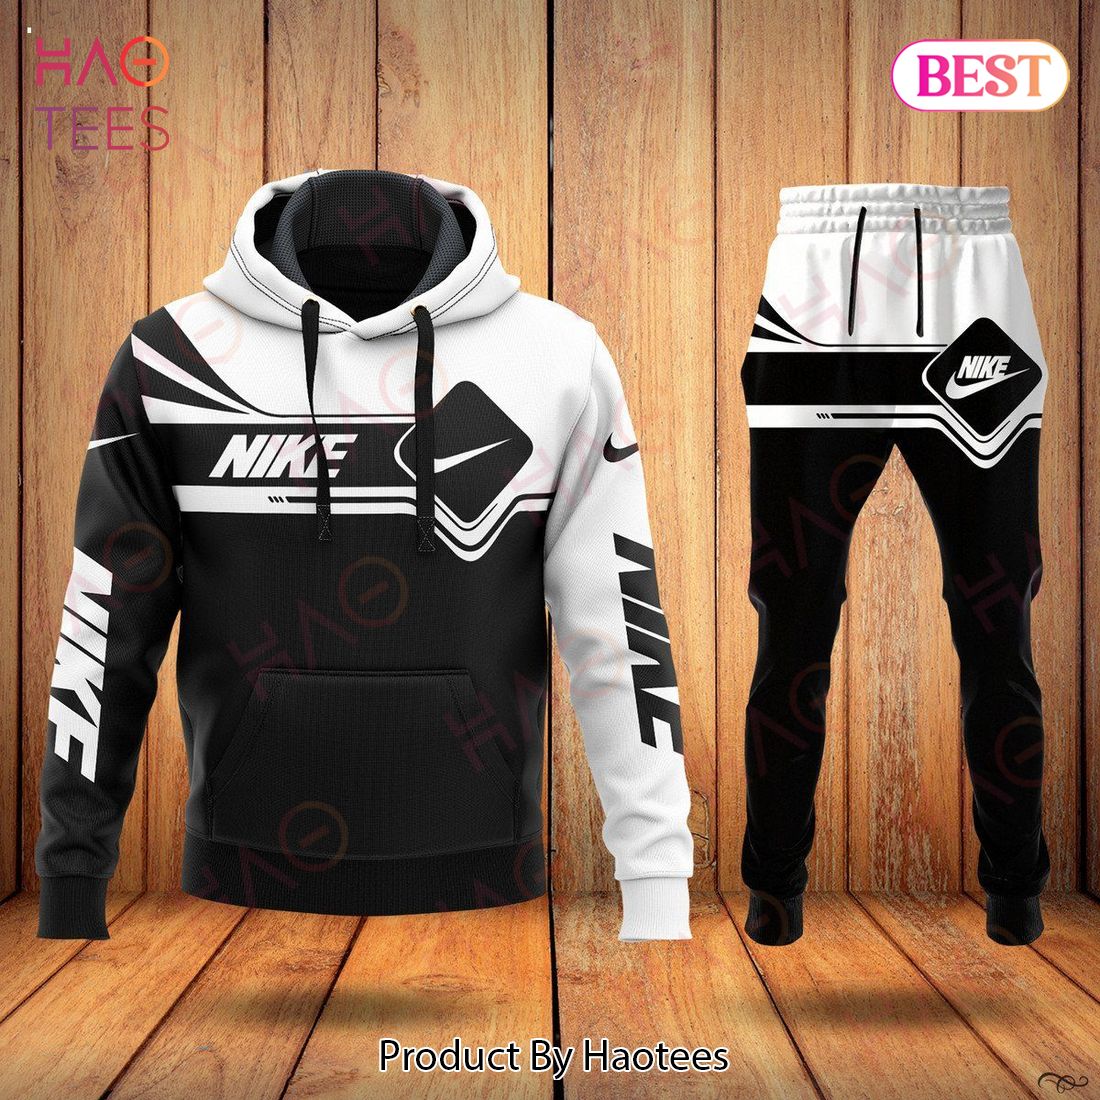 BEST Nike Black Mix White Luxury Brand Hoodie And Pants Limited Edition